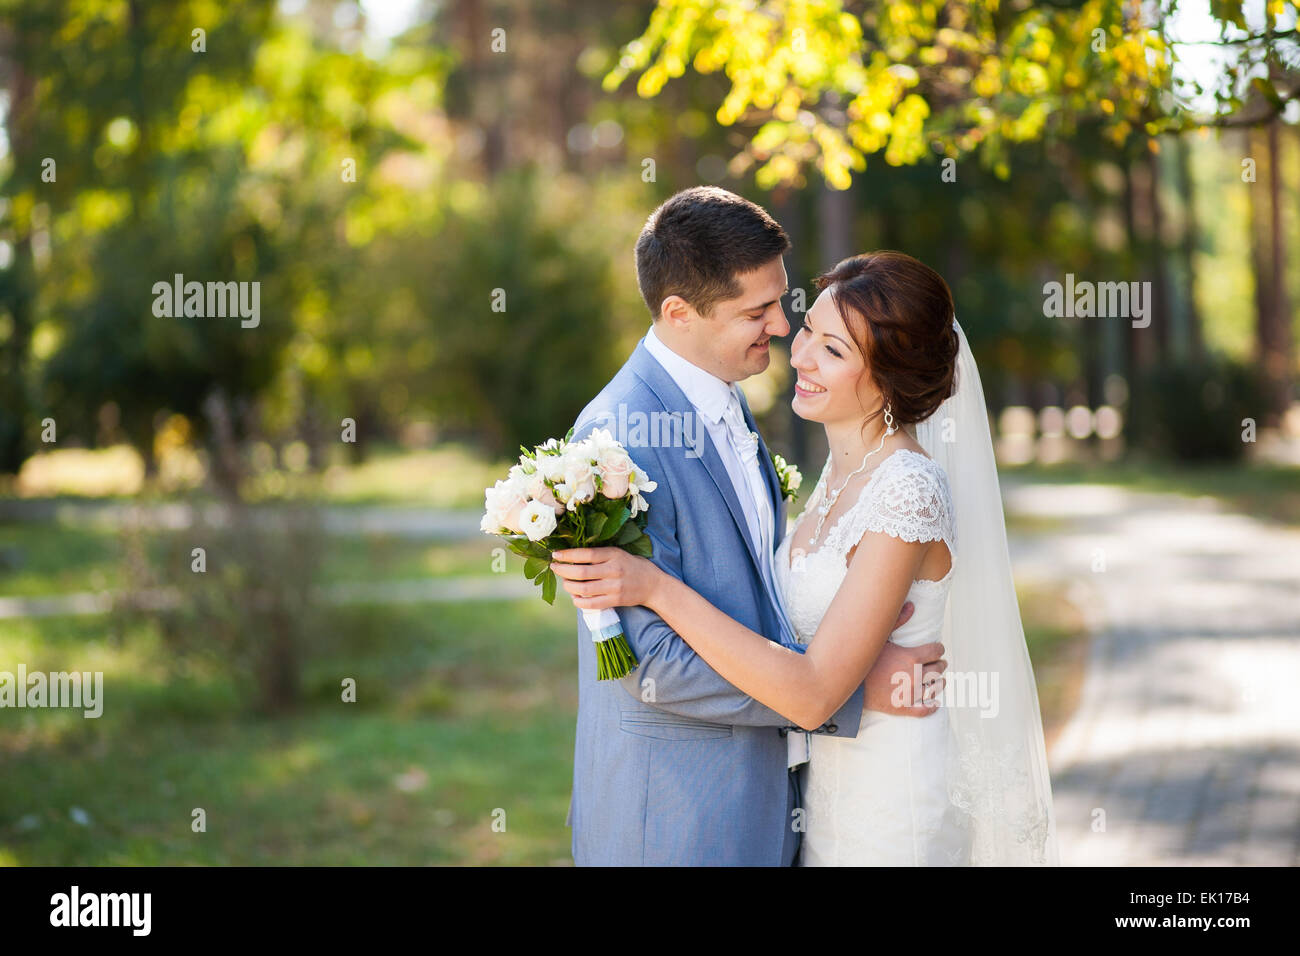 happy bride, groom standing in green park, kissing, smiling, laughing, embracing. lovers in wedding day Stock Photo